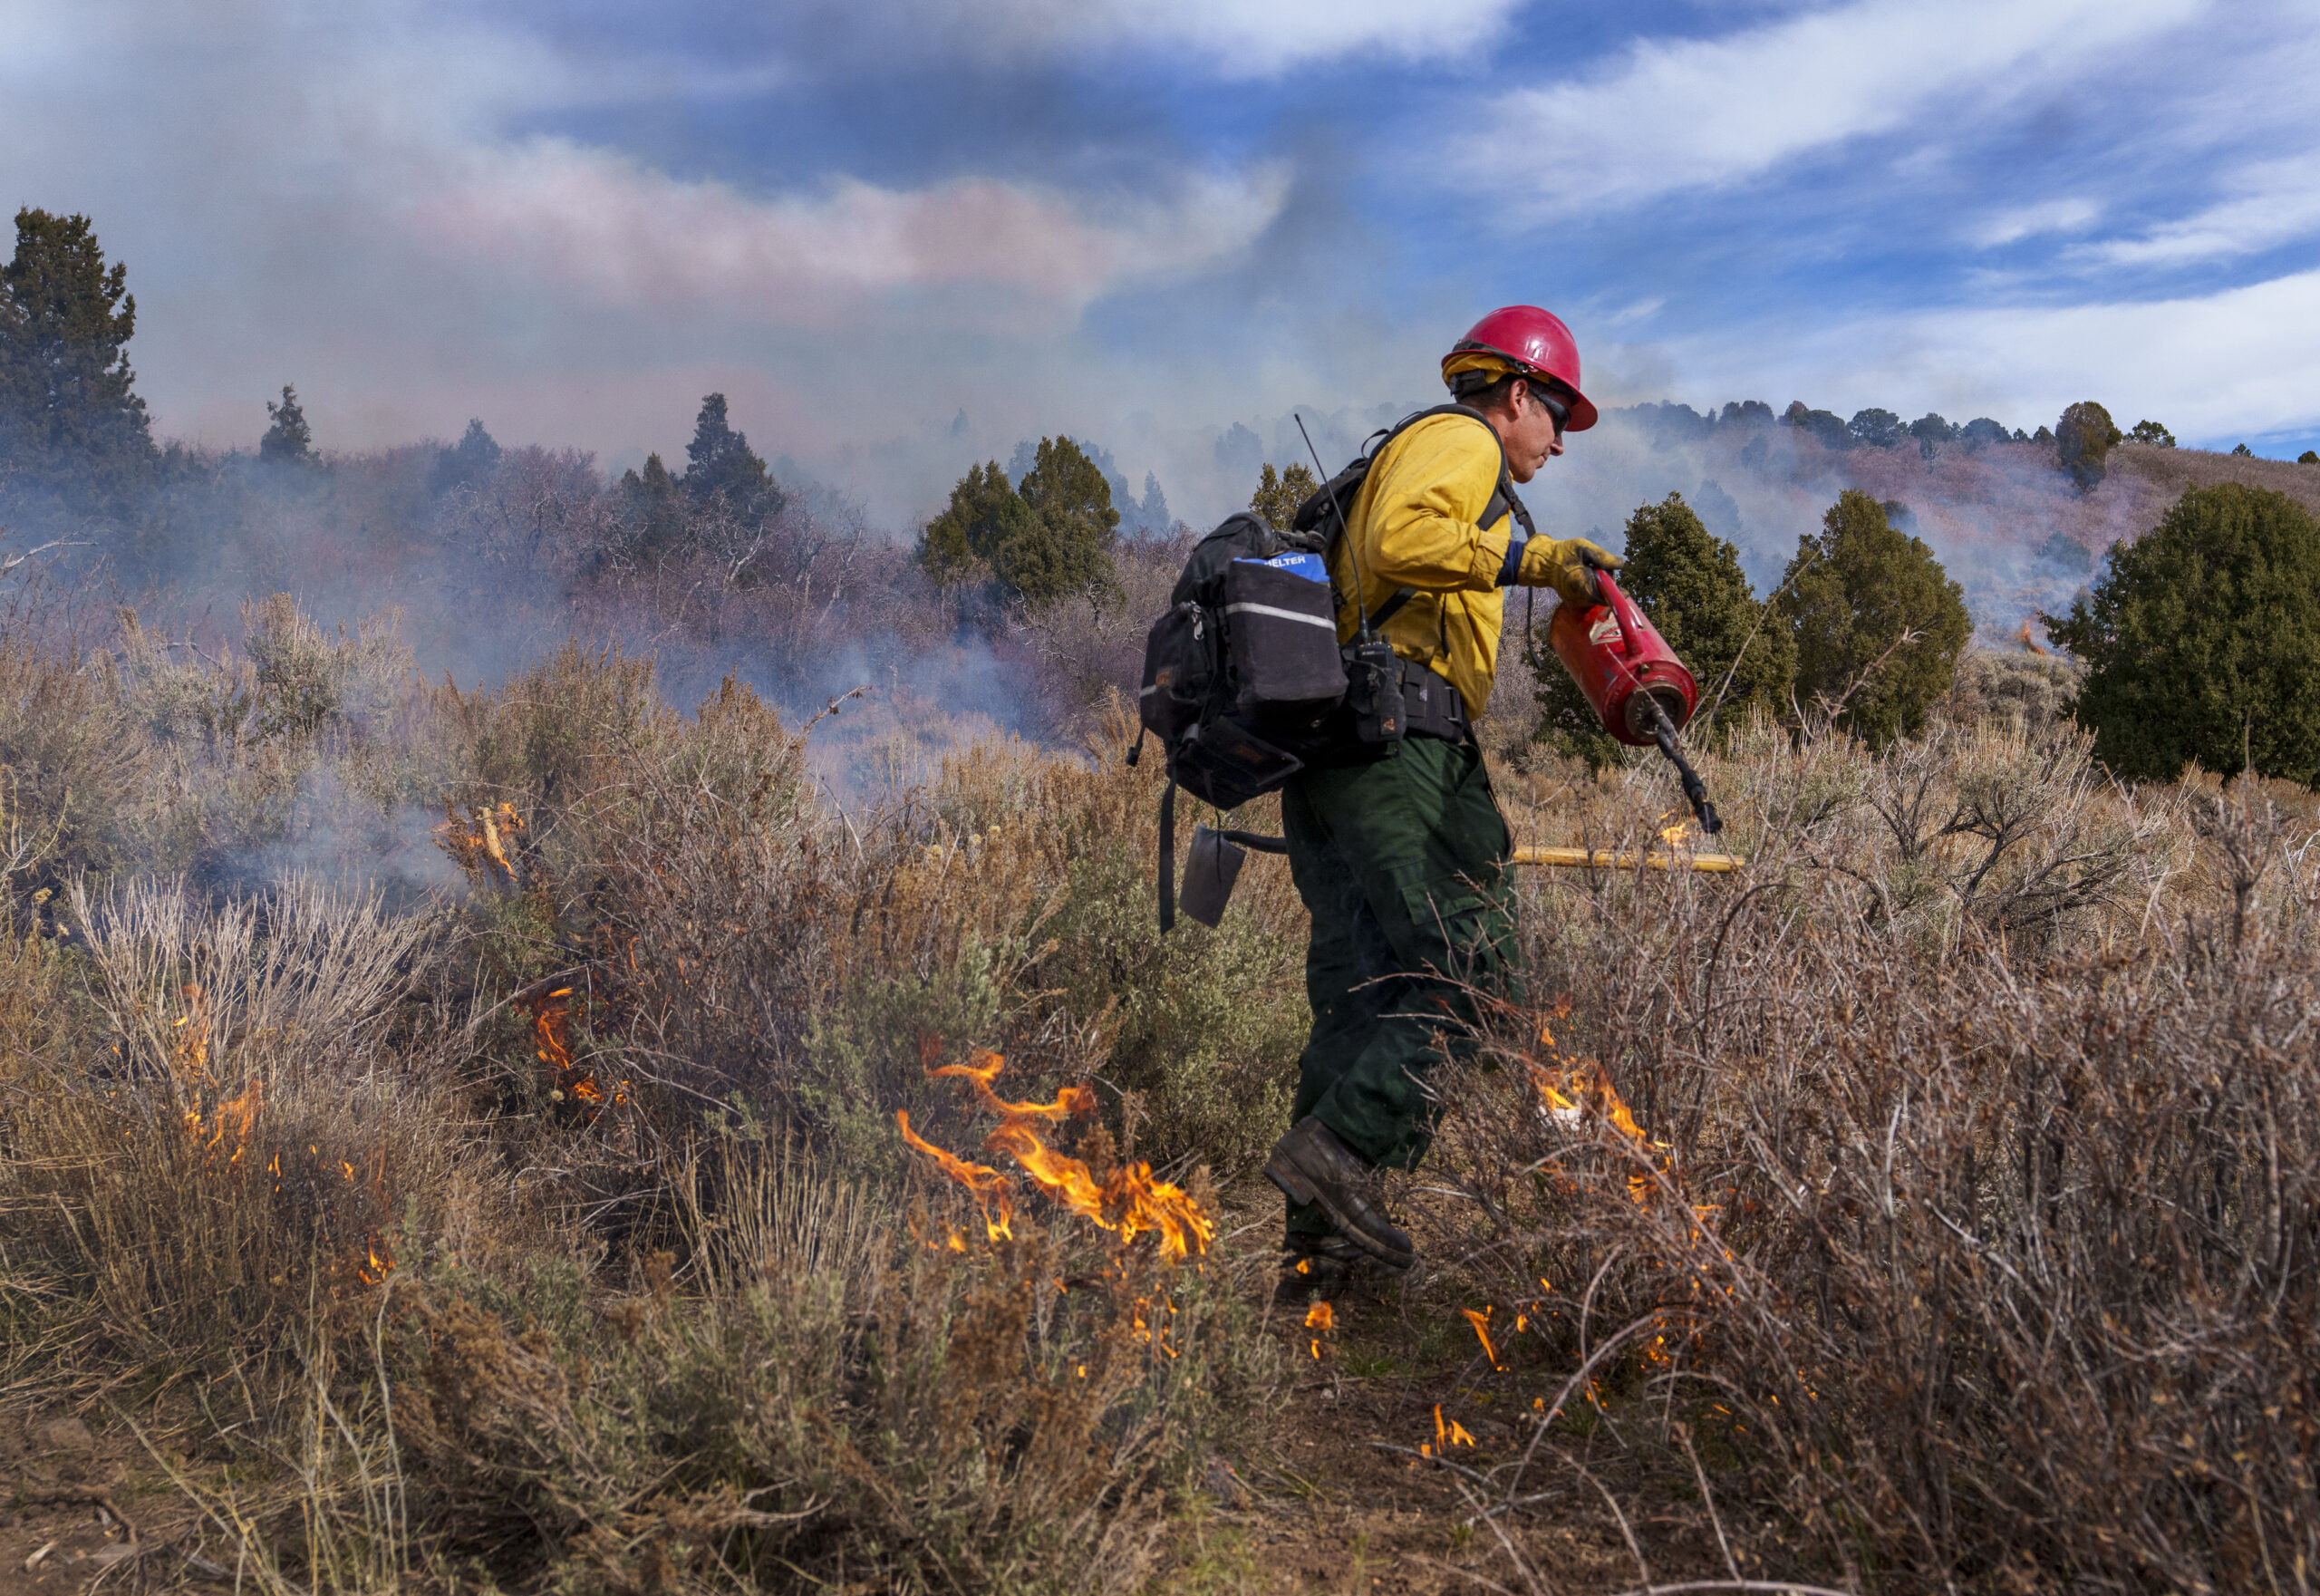 Prescribed Fires At National Forests Resume After Review